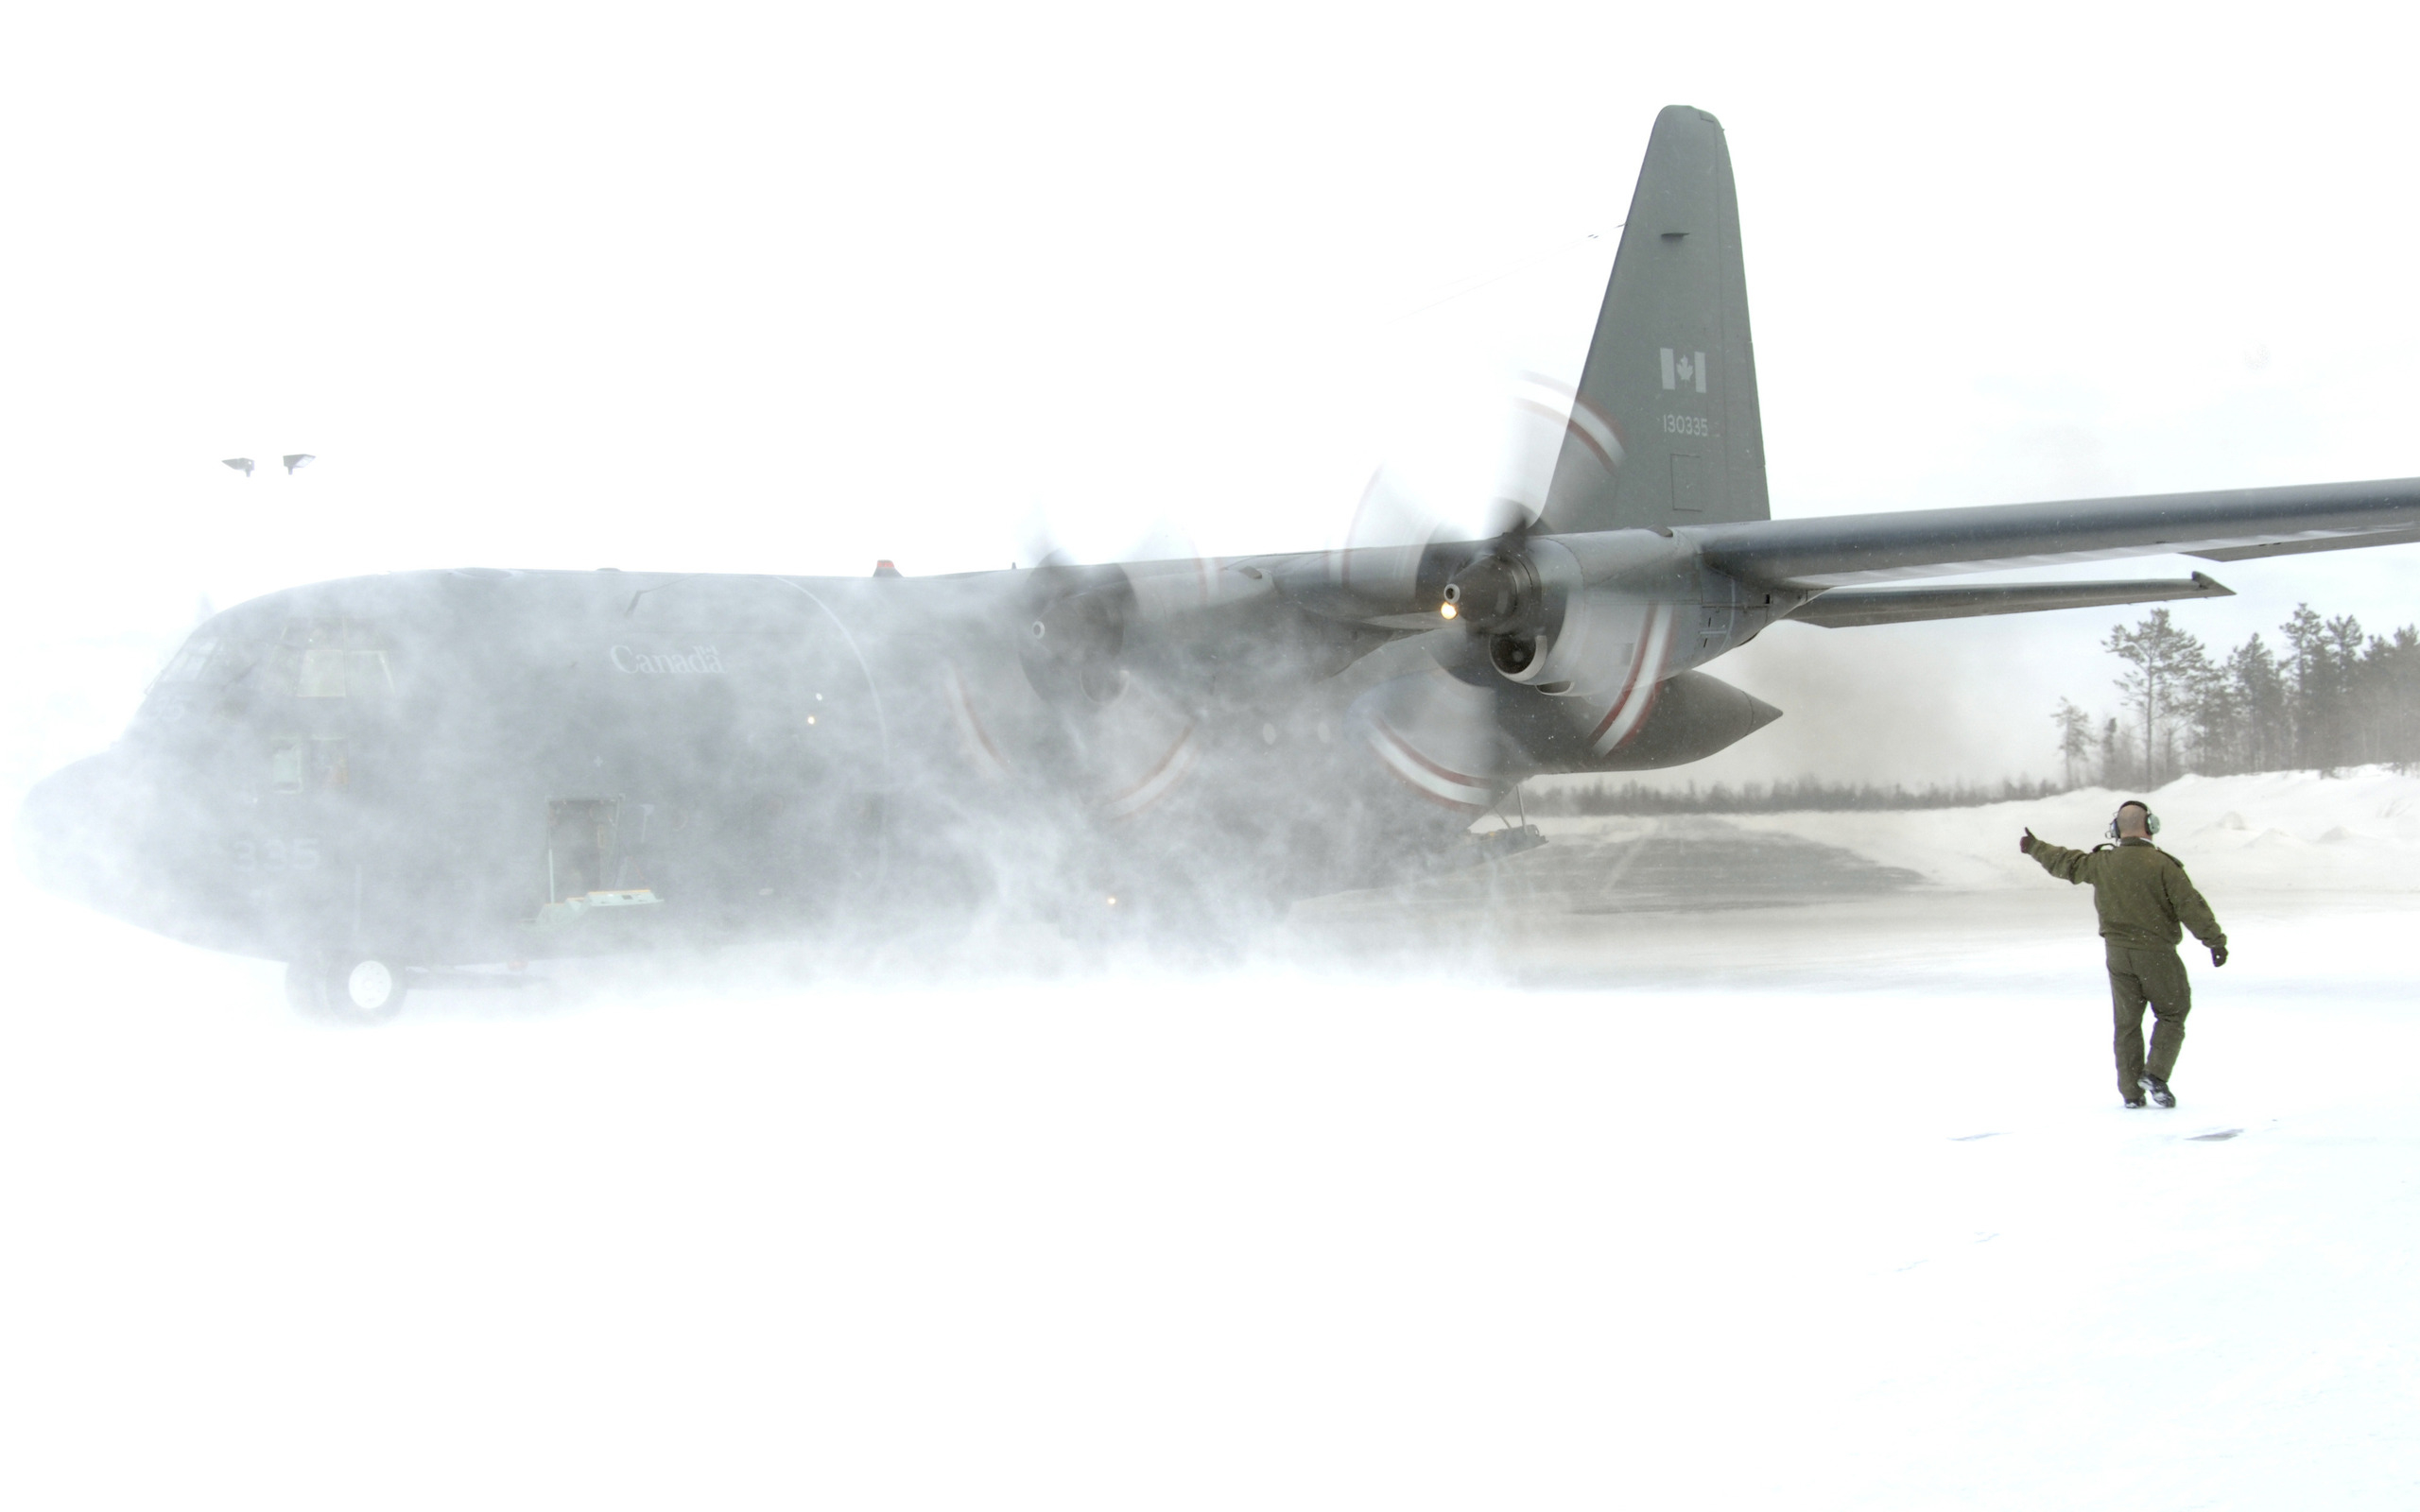 Lockheed C-130 Hercules wallpapers and images - wallpapers ...